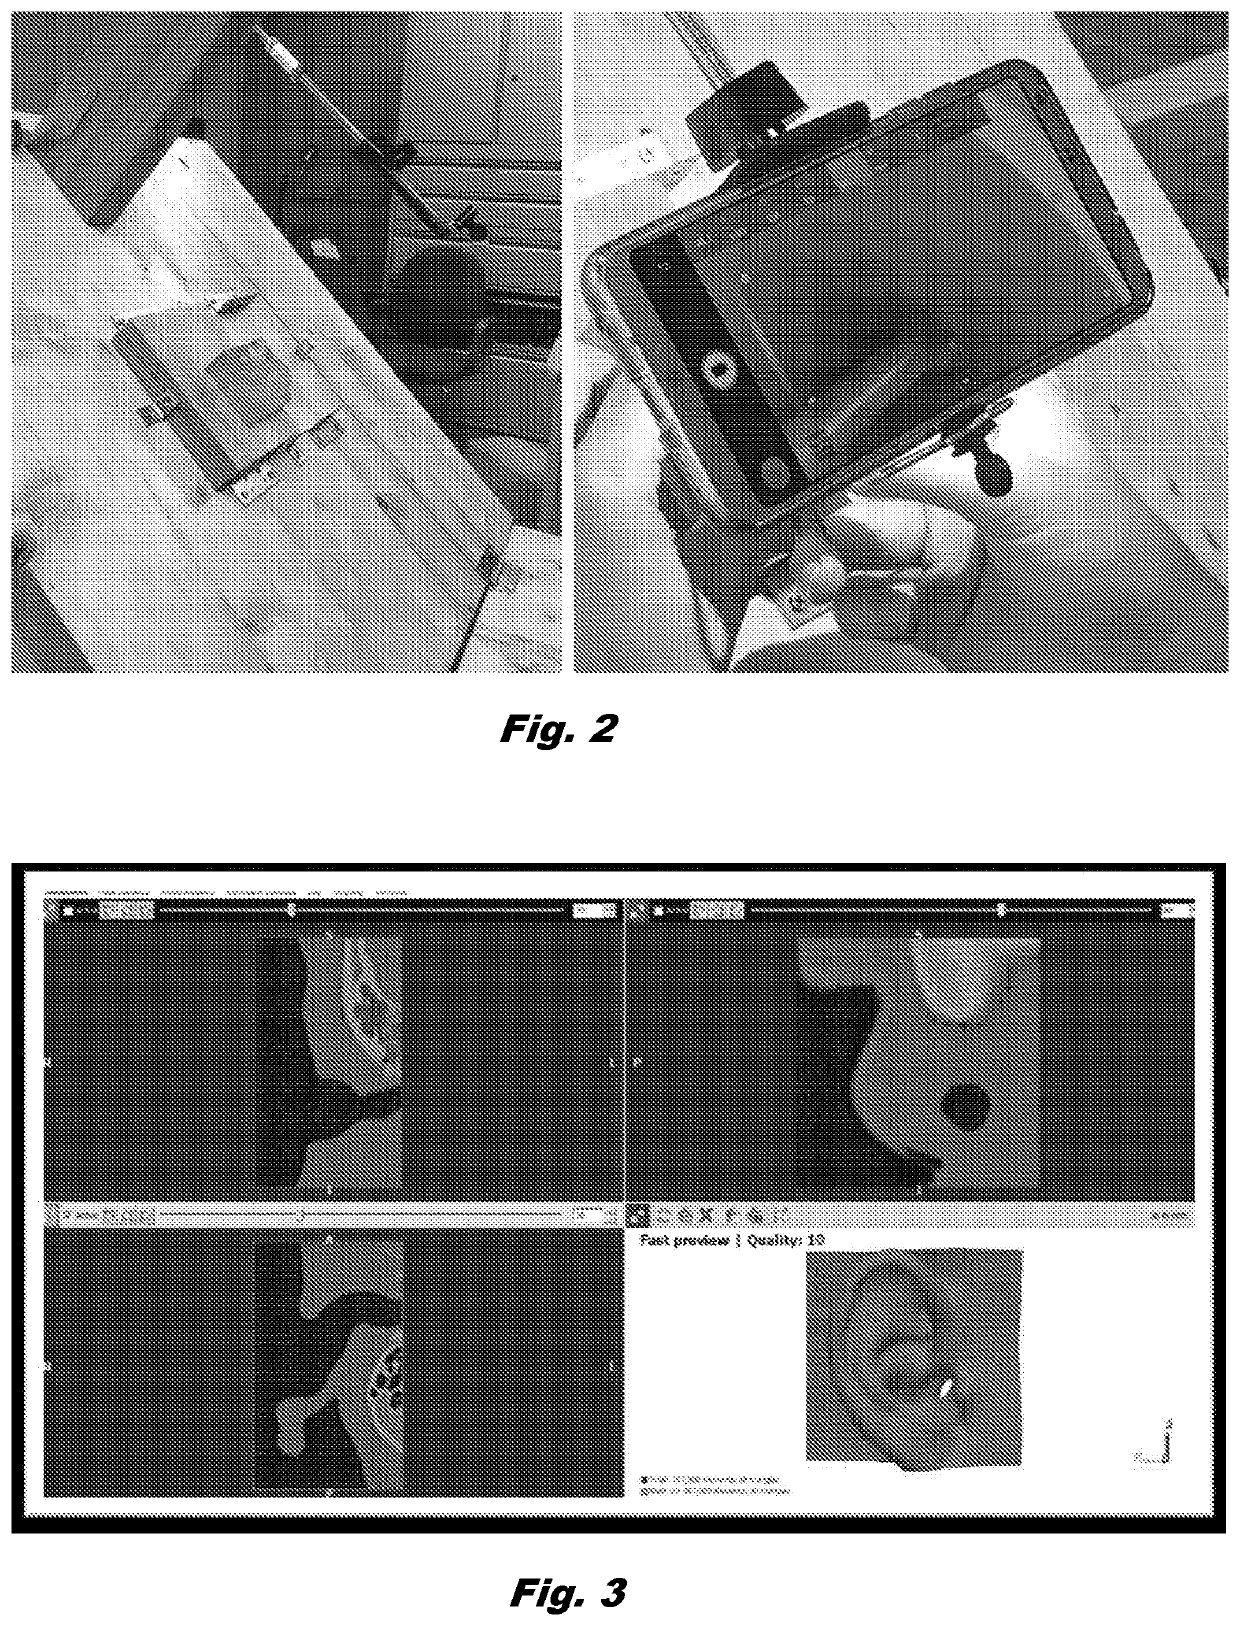 Surgical simulator and methods of use